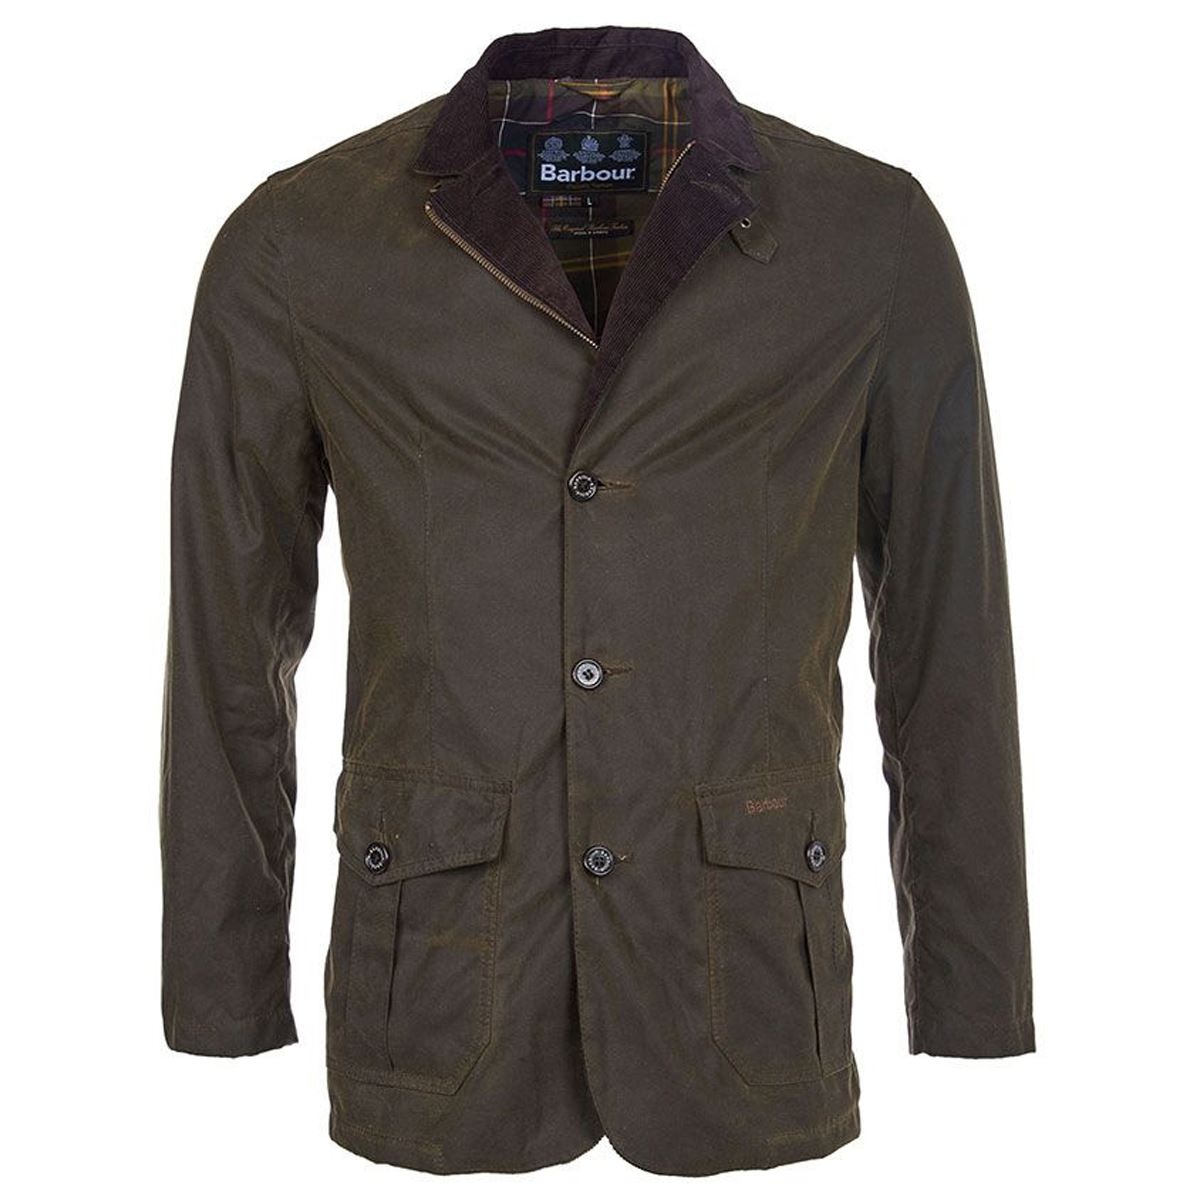 What is the recommended frequency of re-waxing for the Barbour Lutz Jacket?